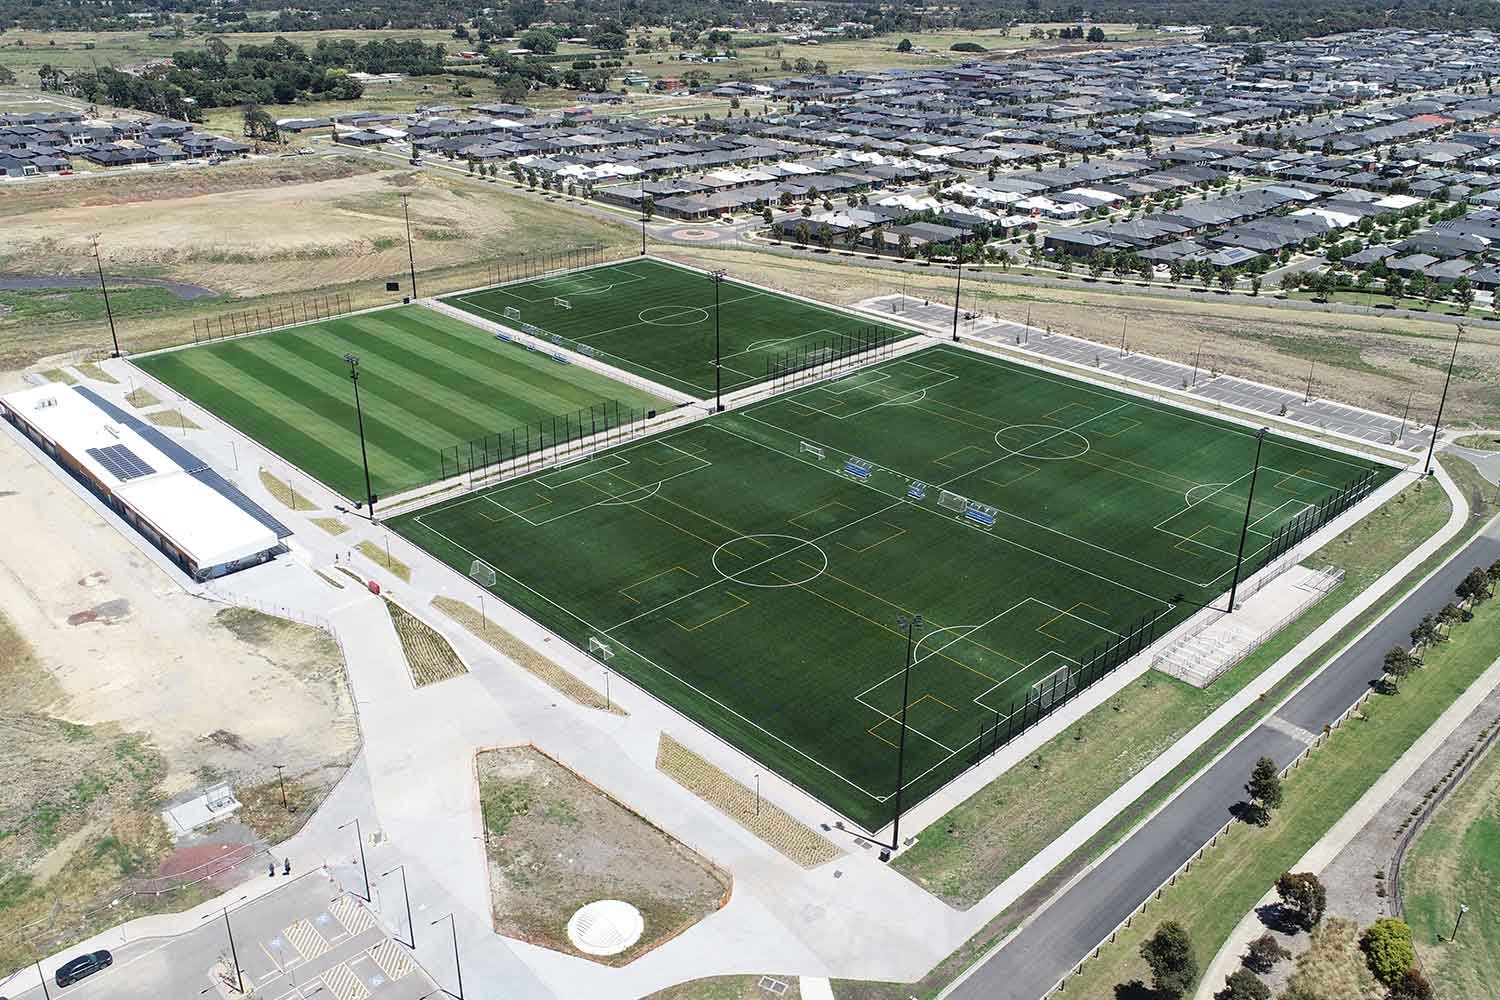 Aerial view of four soccer sports fields with natural turf and hybrid turf surfaces